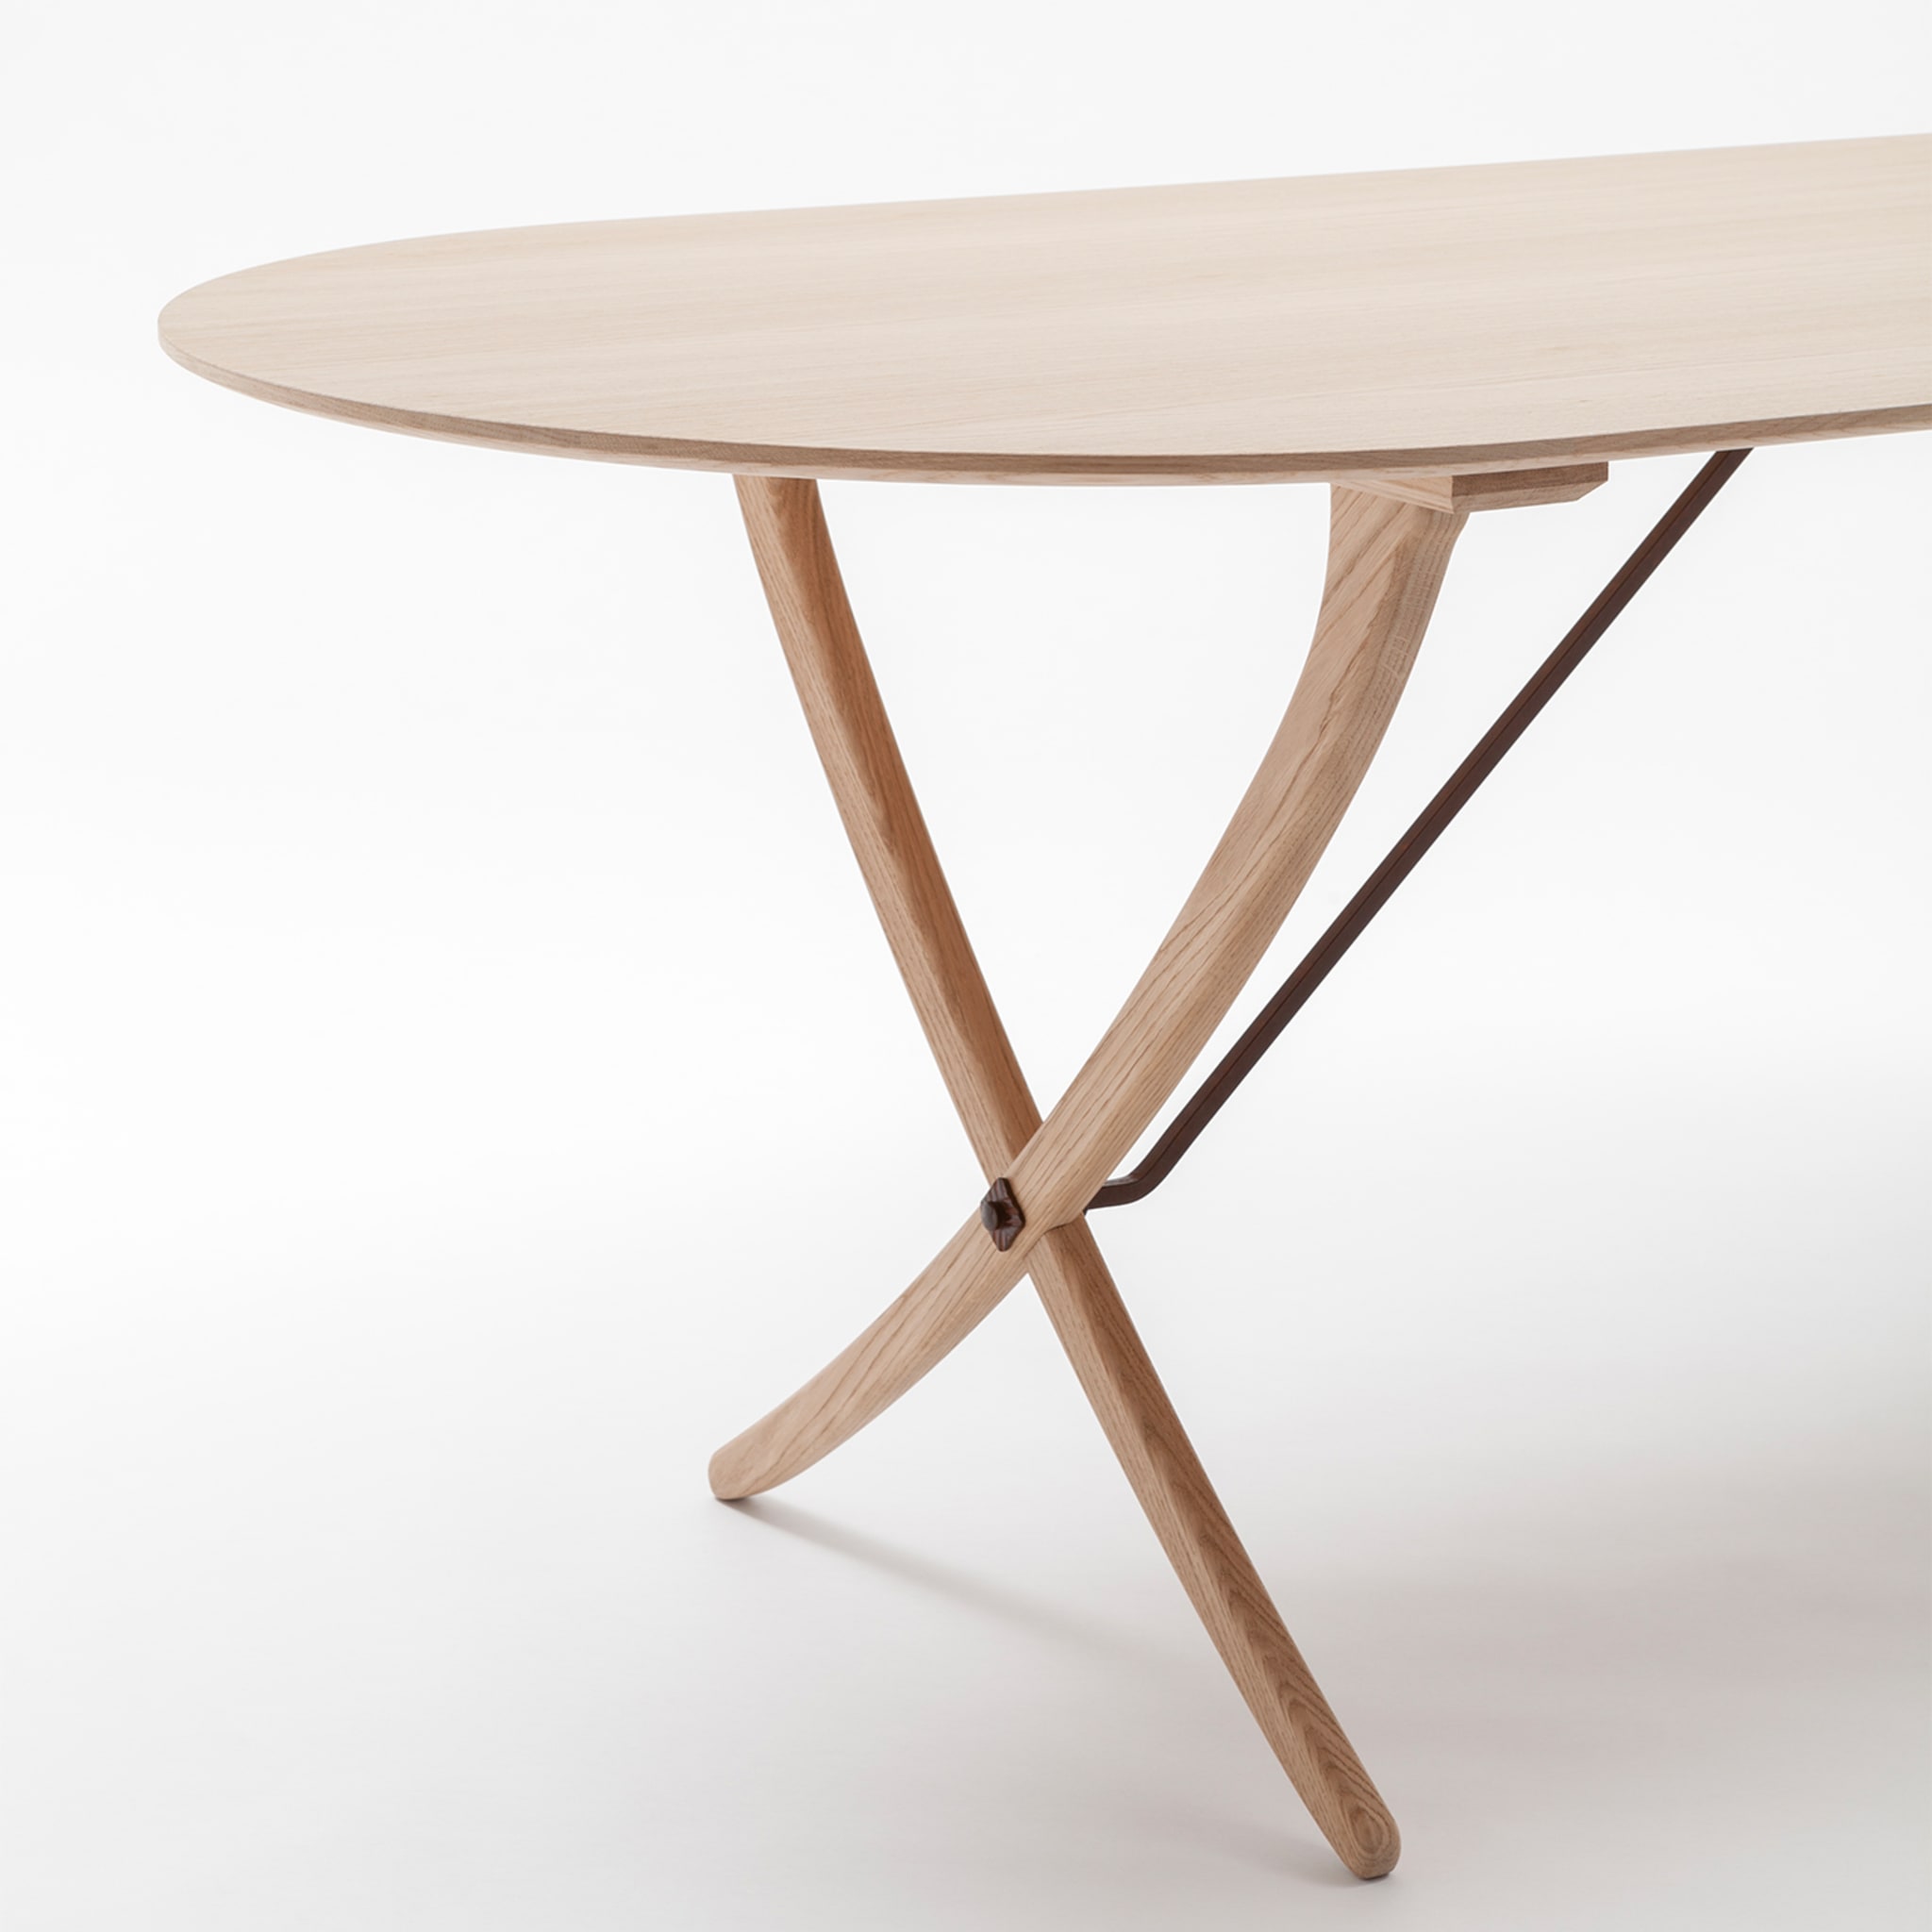 Arch Small Durmast Dining Table - Alternative view 2